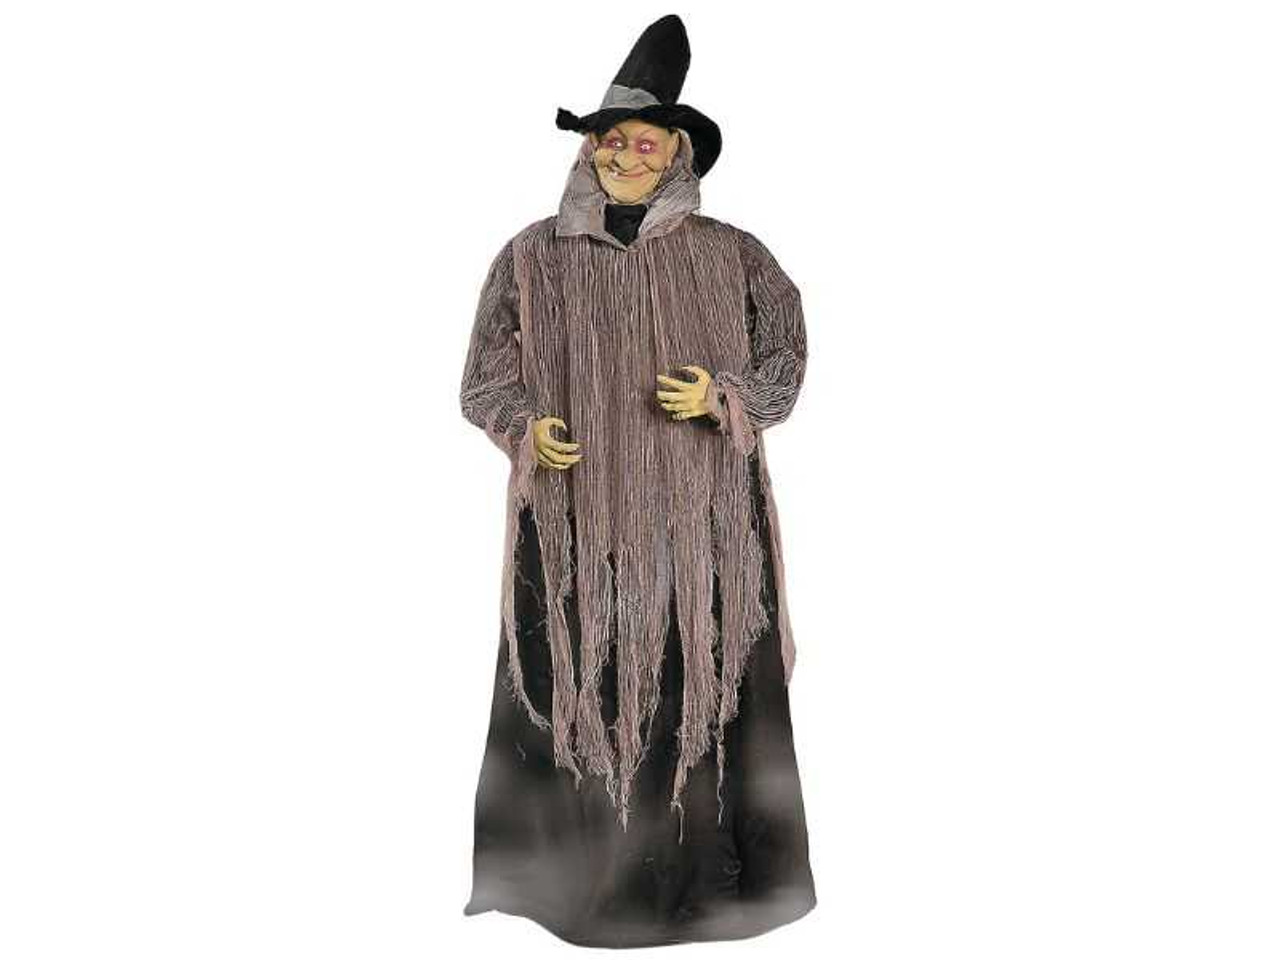 Animated Hovering Witch Prop that glides across the floor and speaks.